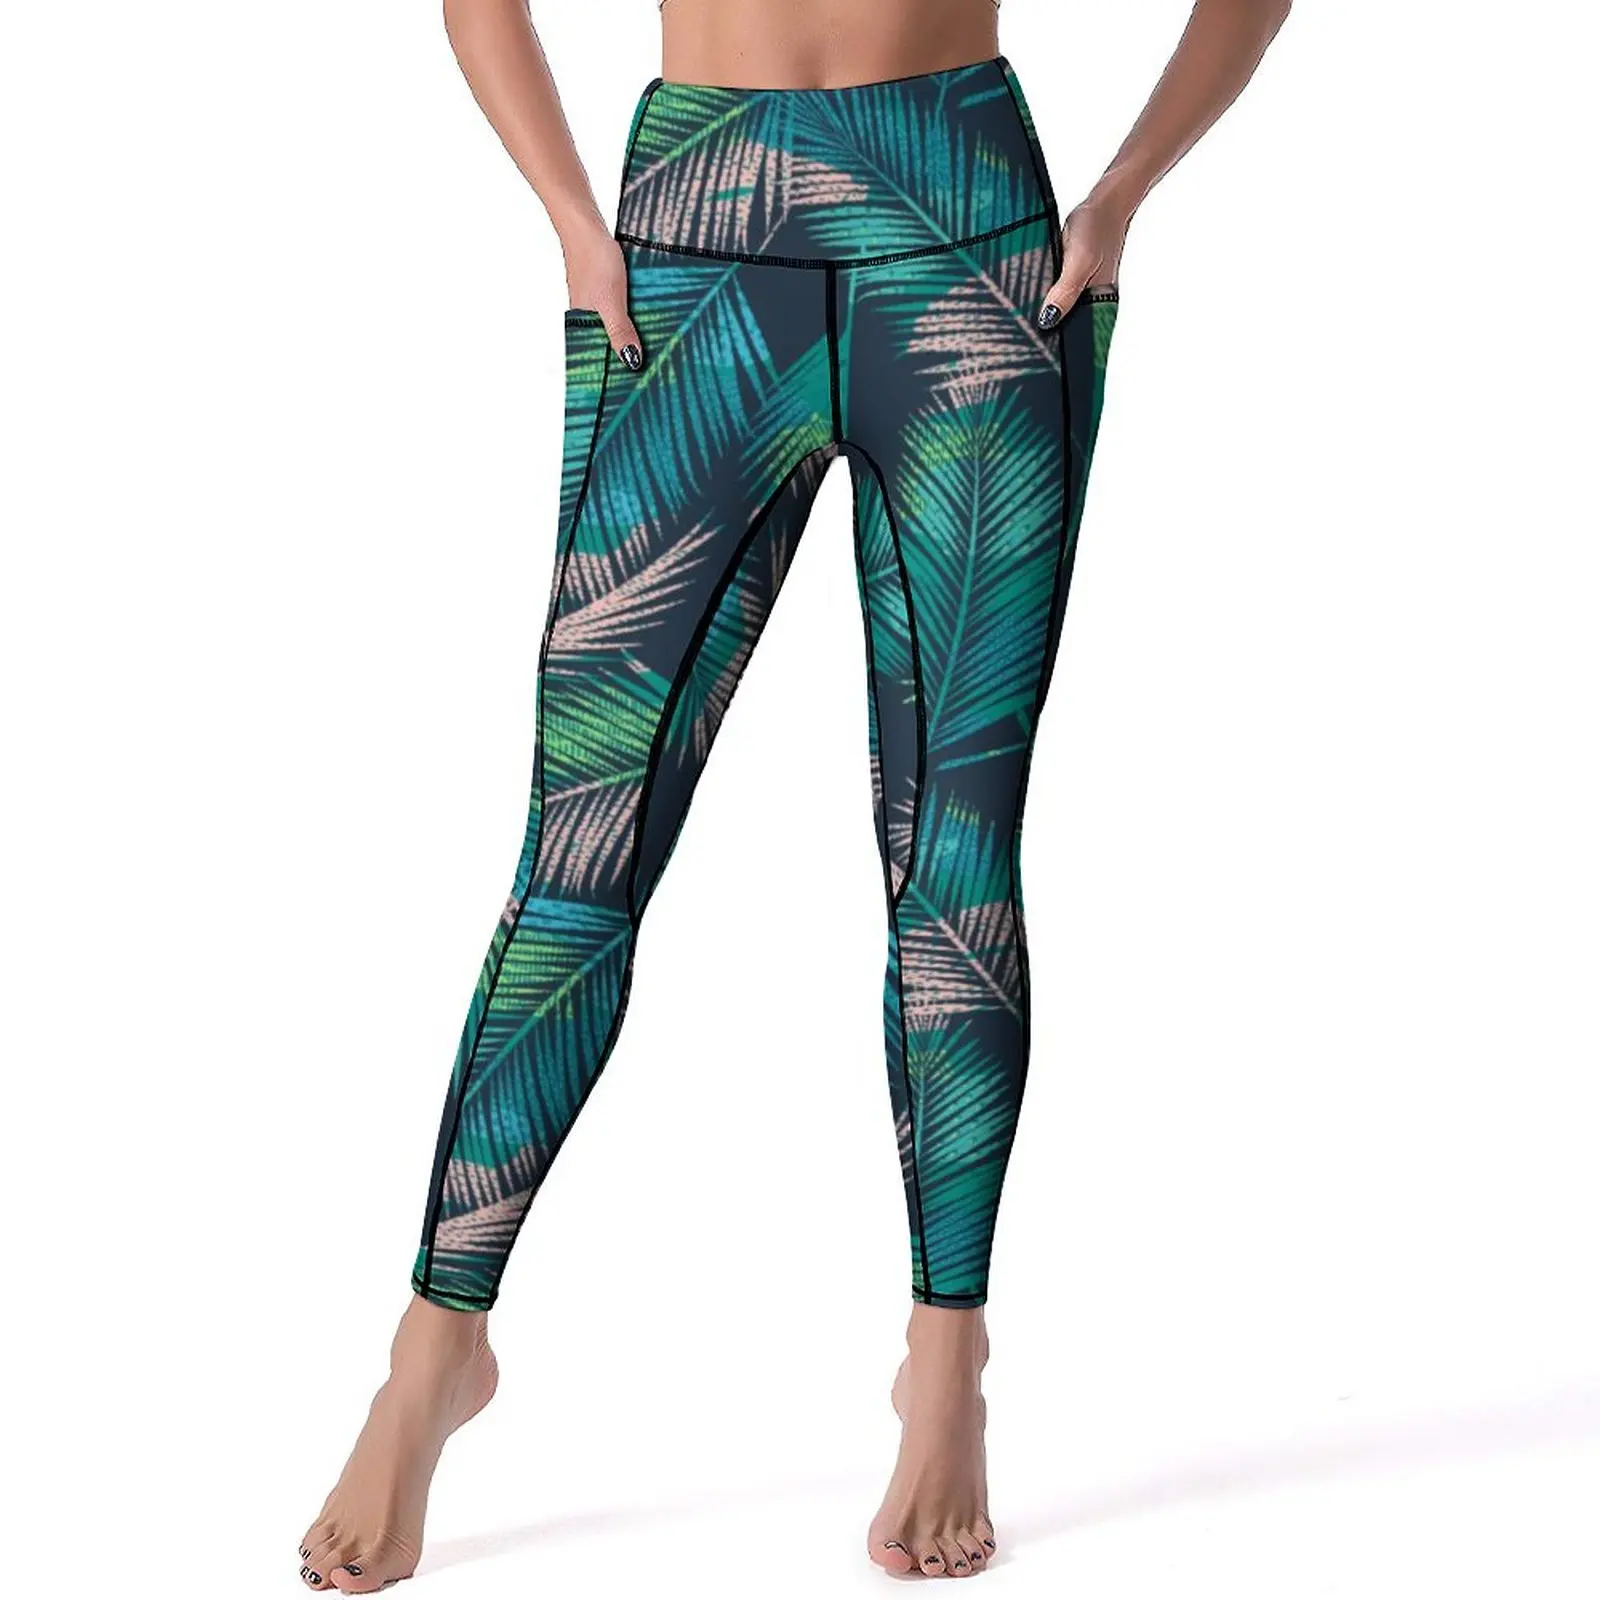 

Tropical Palm Leaves Yoga Pants Sexy Botanical Graphic Leggings Push Up Workout Leggins Women Cute Quick-Dry Sports Tights